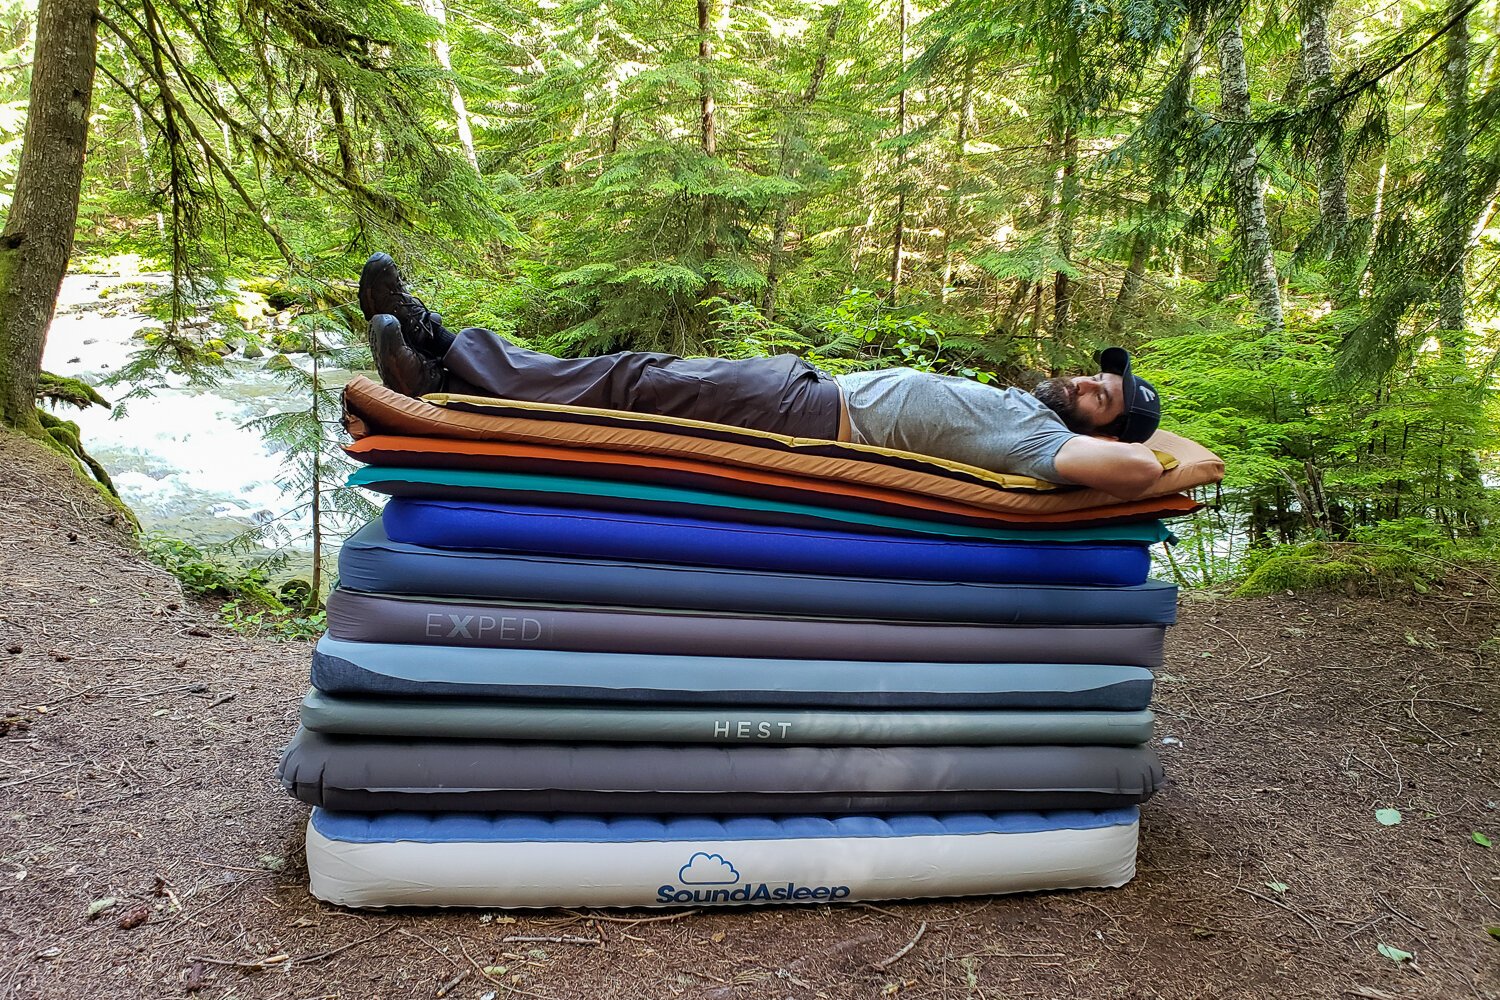 The Ultimate Travel Companion: Roll Up Mattresses for Camping and Outdoor Adventures